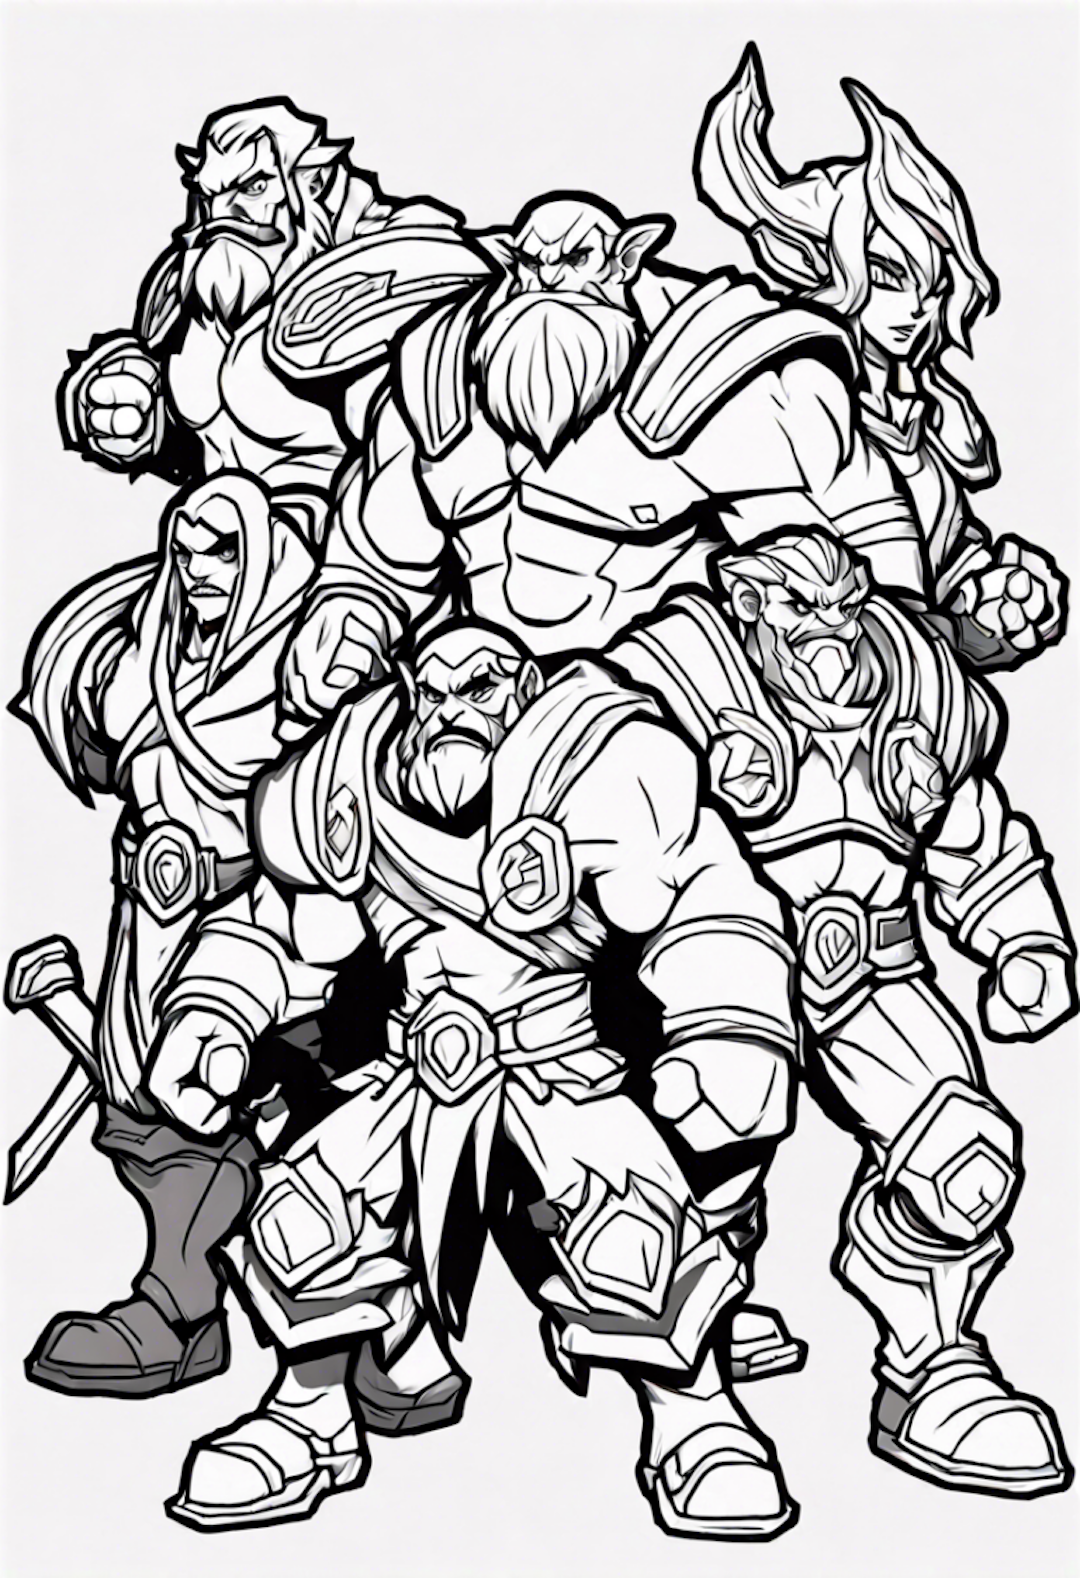 Battle-Ready Warriors Unite coloring pages